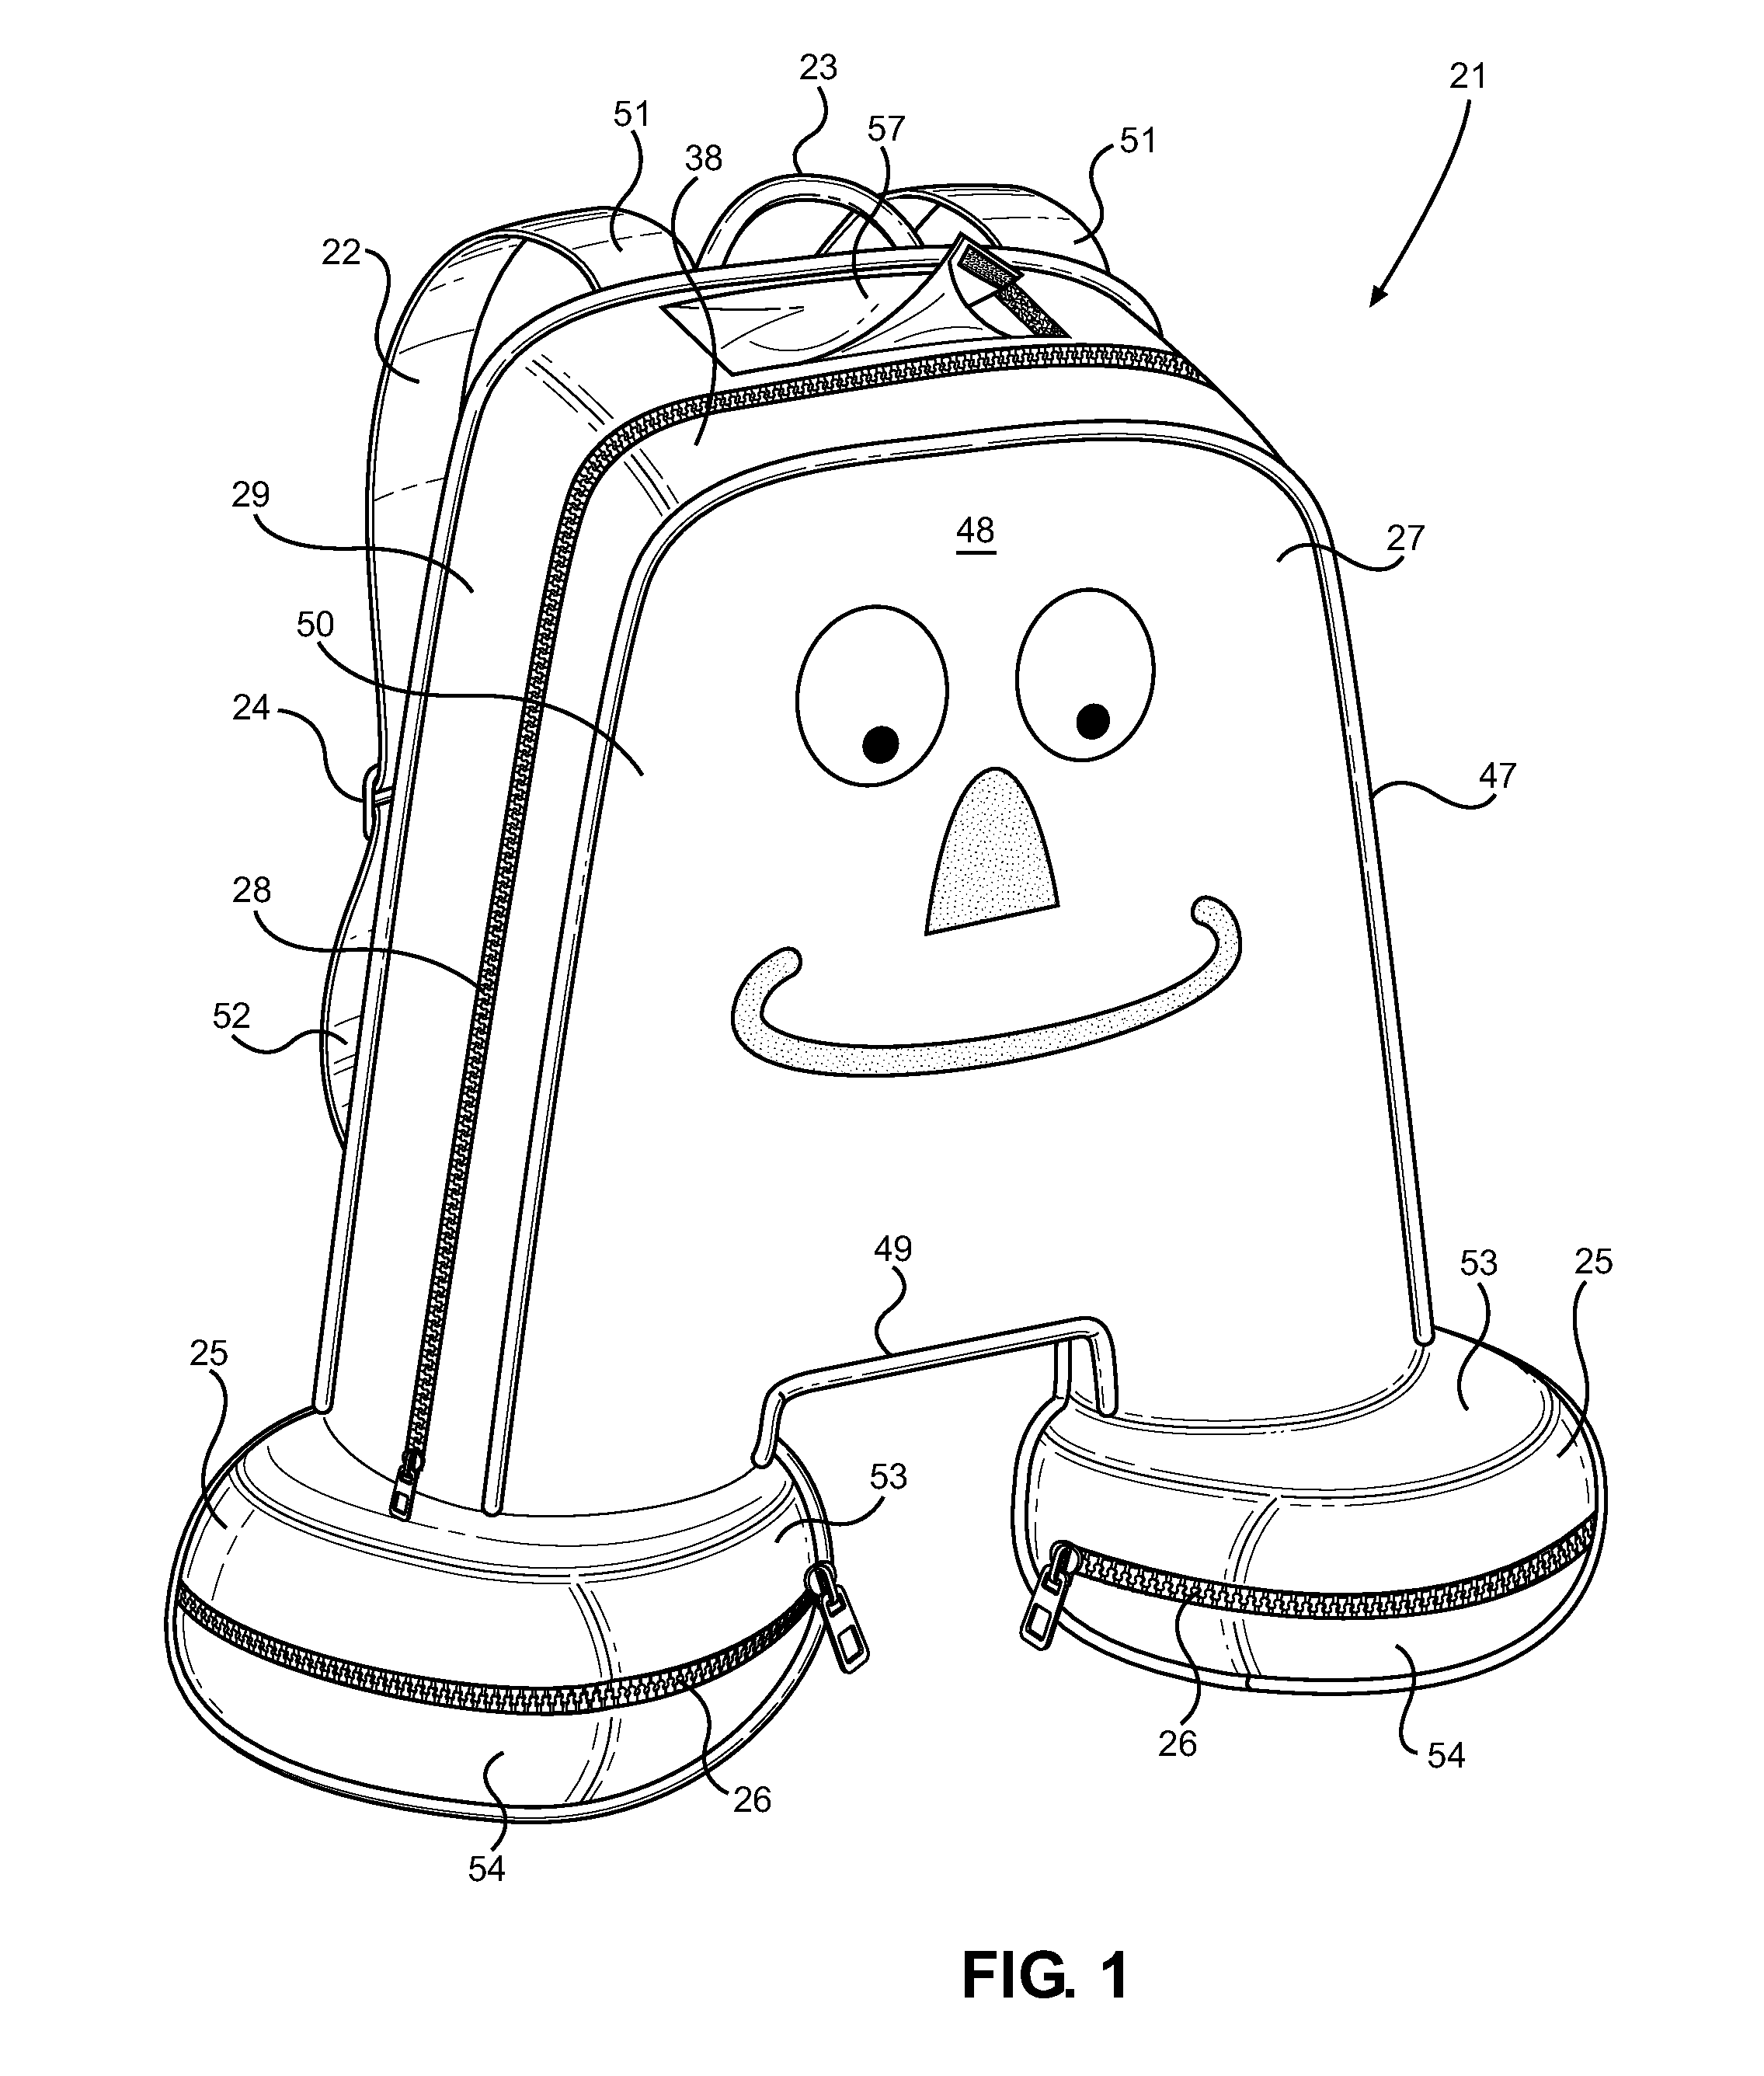 Compartmentalized Backpack with Imbedded Tracker Device